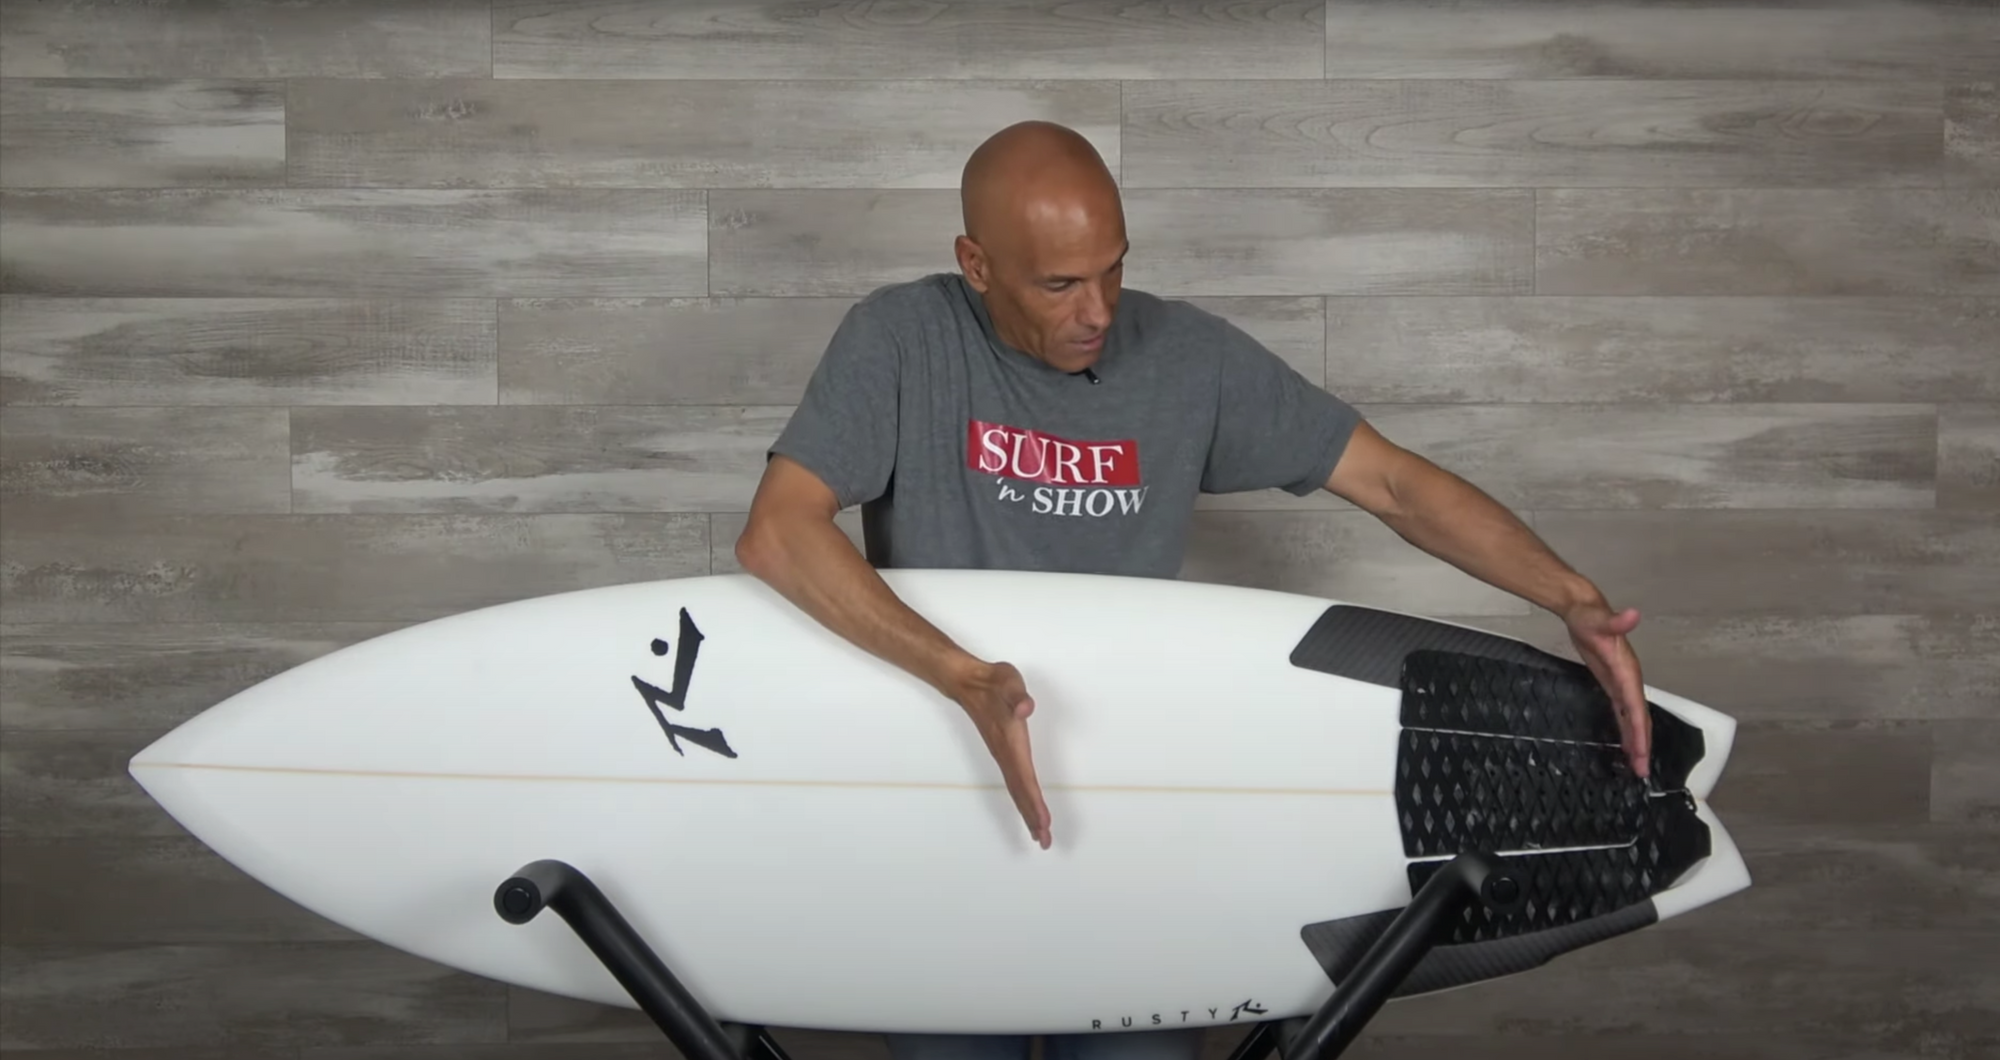 Surf n Show Rusty “Twin Fin” Surfboard Review